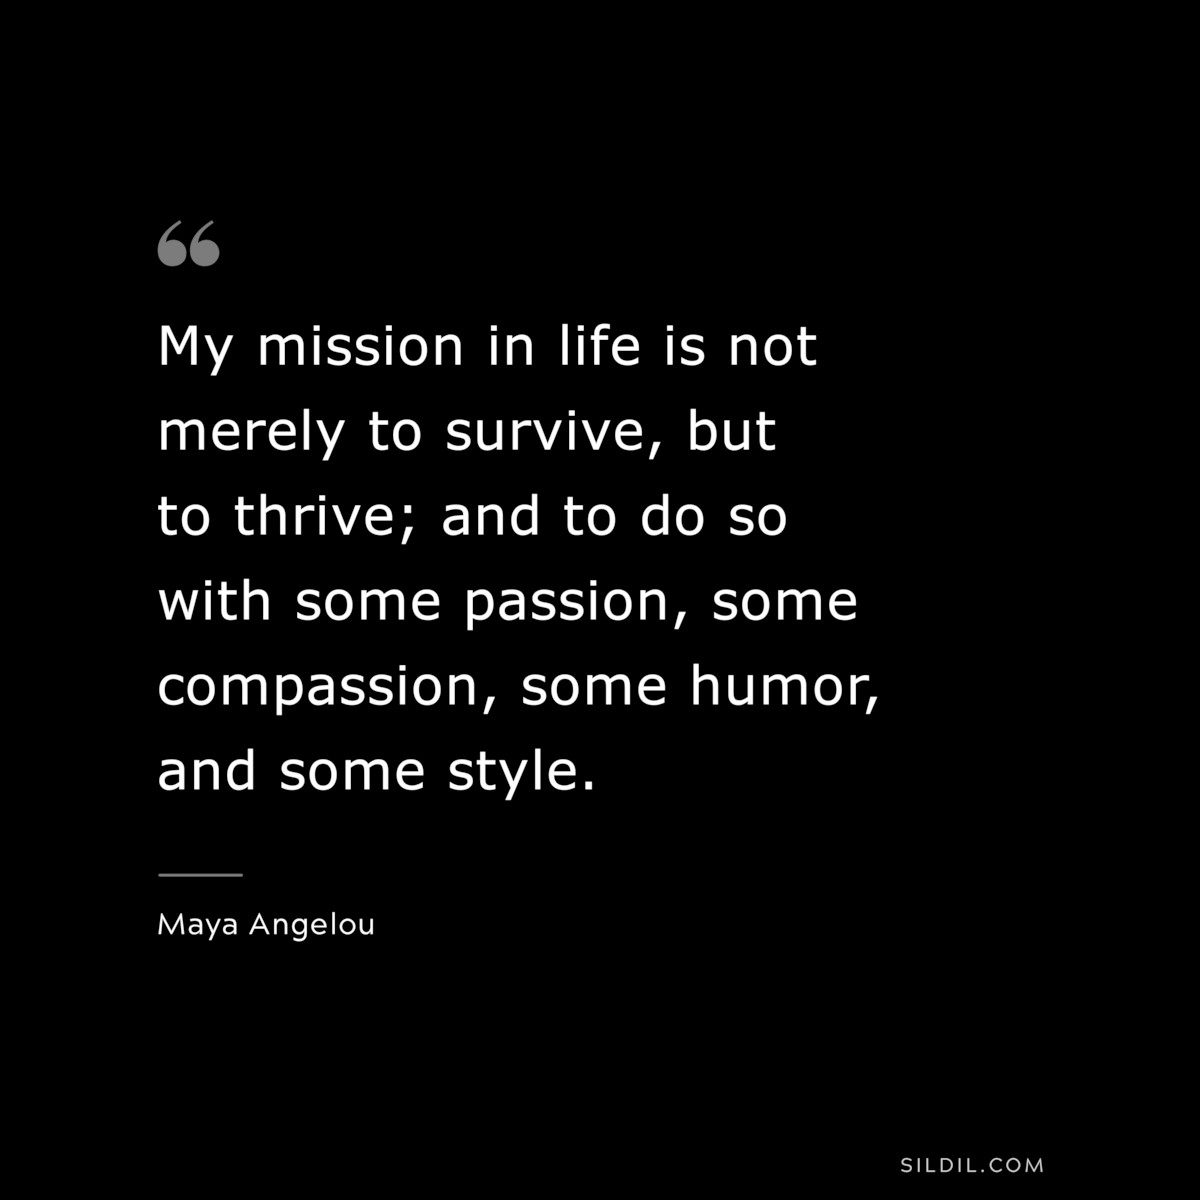 My mission in life is not merely to survive, but to thrive; and to do so with some passion, some compassion, some humor, and some style. ― Maya Angelou